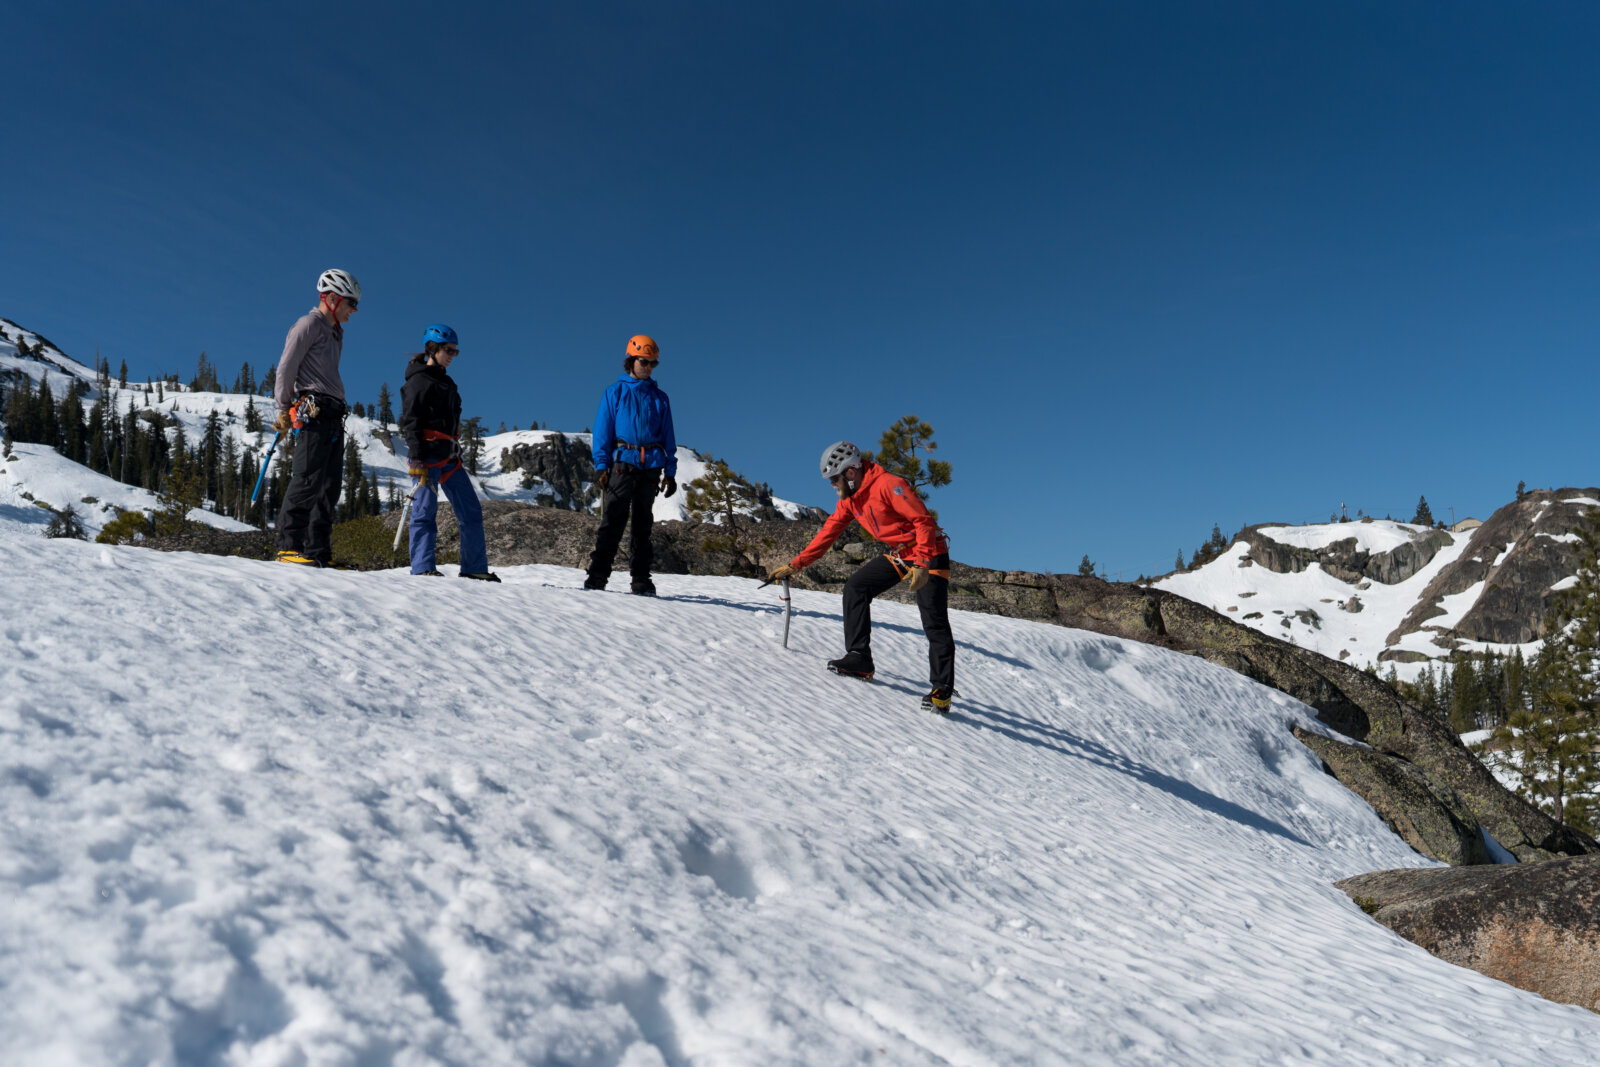 Guide teaches a group of students Mountaineering skills, like glacier travel and crevasse rescue, near Lake Tahoe in the Sierra Nevada mountains with Alpenglow Expeditions' professional mountain guides.